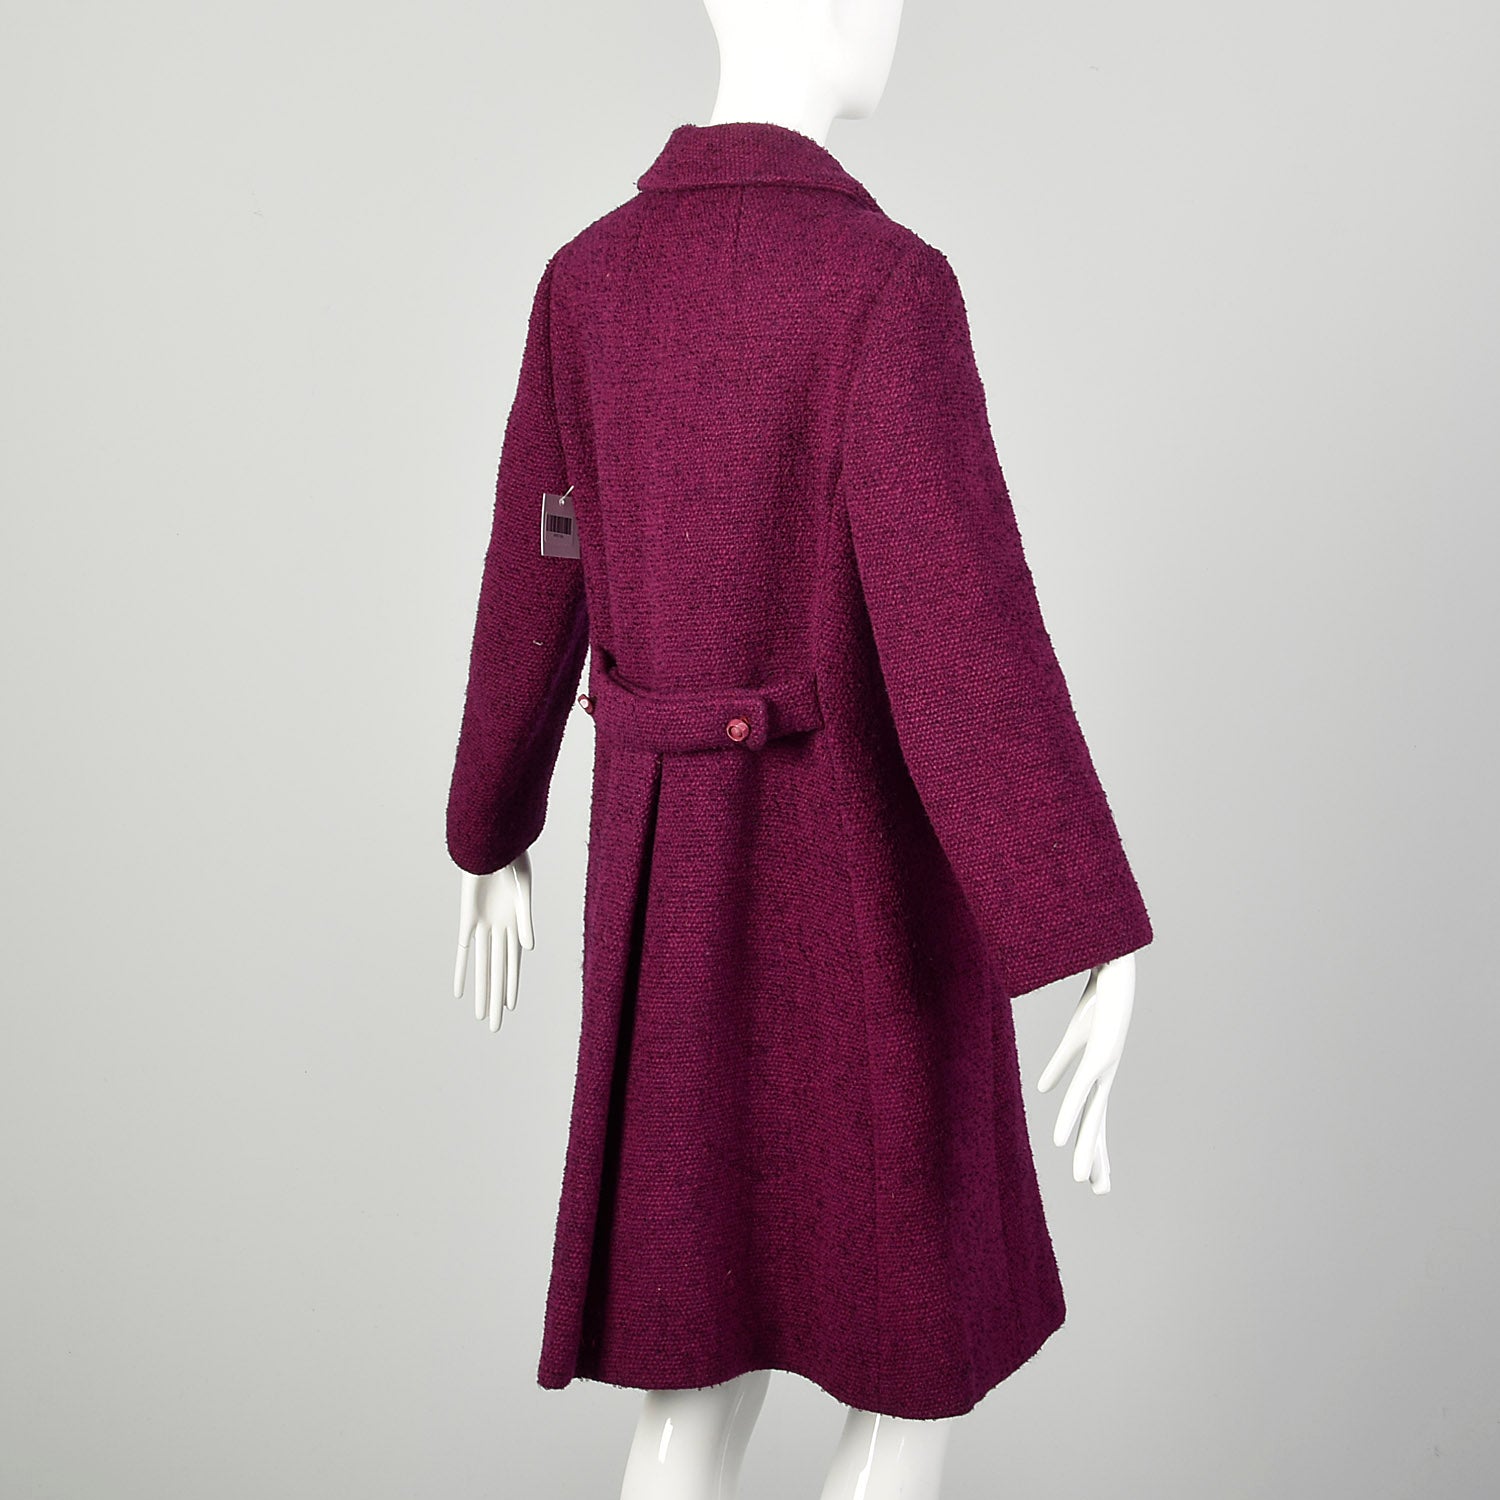 Small 1960s Coat Mauve Tweed Double Breasted Boucle Winter Vintage Outerwear